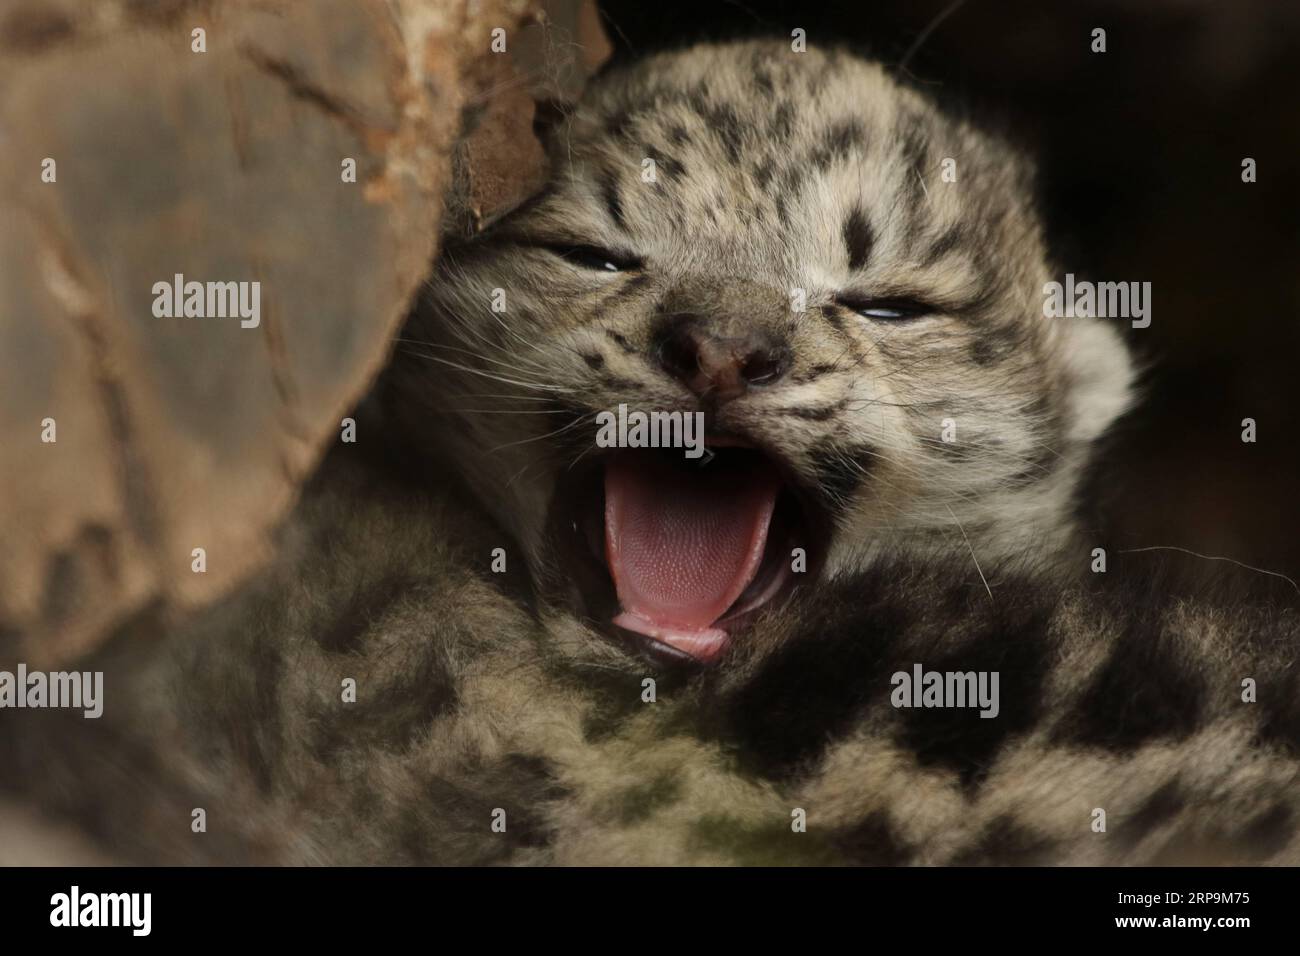 (190411) -- BEIJING, April 11, 2019 -- Photo taken on June 16, 2017 shows a snow leopard cub in bushes in Gaduo Township of Chengduo County under Yushu Tibetan Autonomous Prefecture, northwest China s Qinghai Province. Li Yuhan can still vividly remember when she encountered snow leopards two years ago at Sanjiangyuan, meaning source for three rivers, in northwest China s Qinghai Province. I was with a scientific survey team, and we were heading toward a mountain top in Namsel Township of Yushu Tibetan Autonomous Prefecture, said Li, a student of Peking University. I saw seven snow leopards on Stock Photo